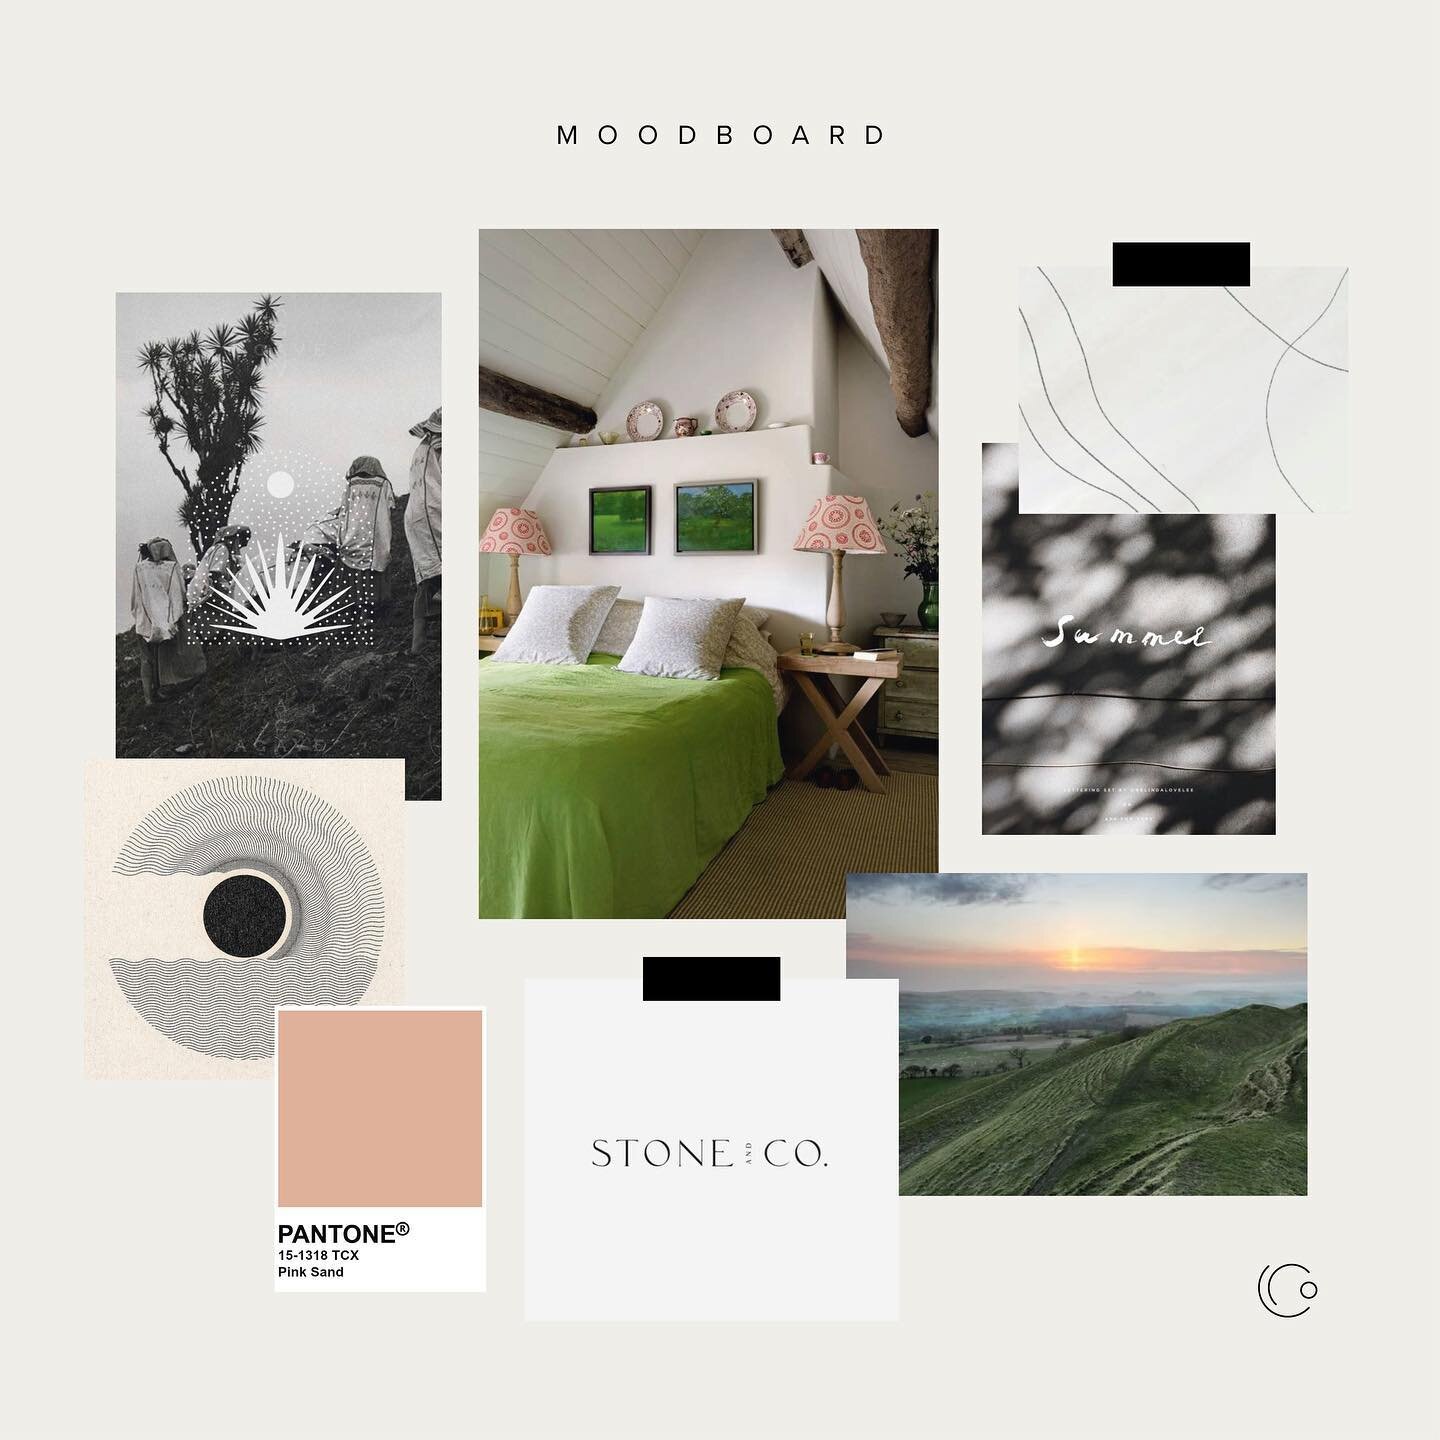 A little glimpse of the moodboard created for a beautiful holiday home here in West Dorset. A unique house with an interesting story behind it - historic but modern, and local yet global.

If you&rsquo;re a holiday home owner and would like design he